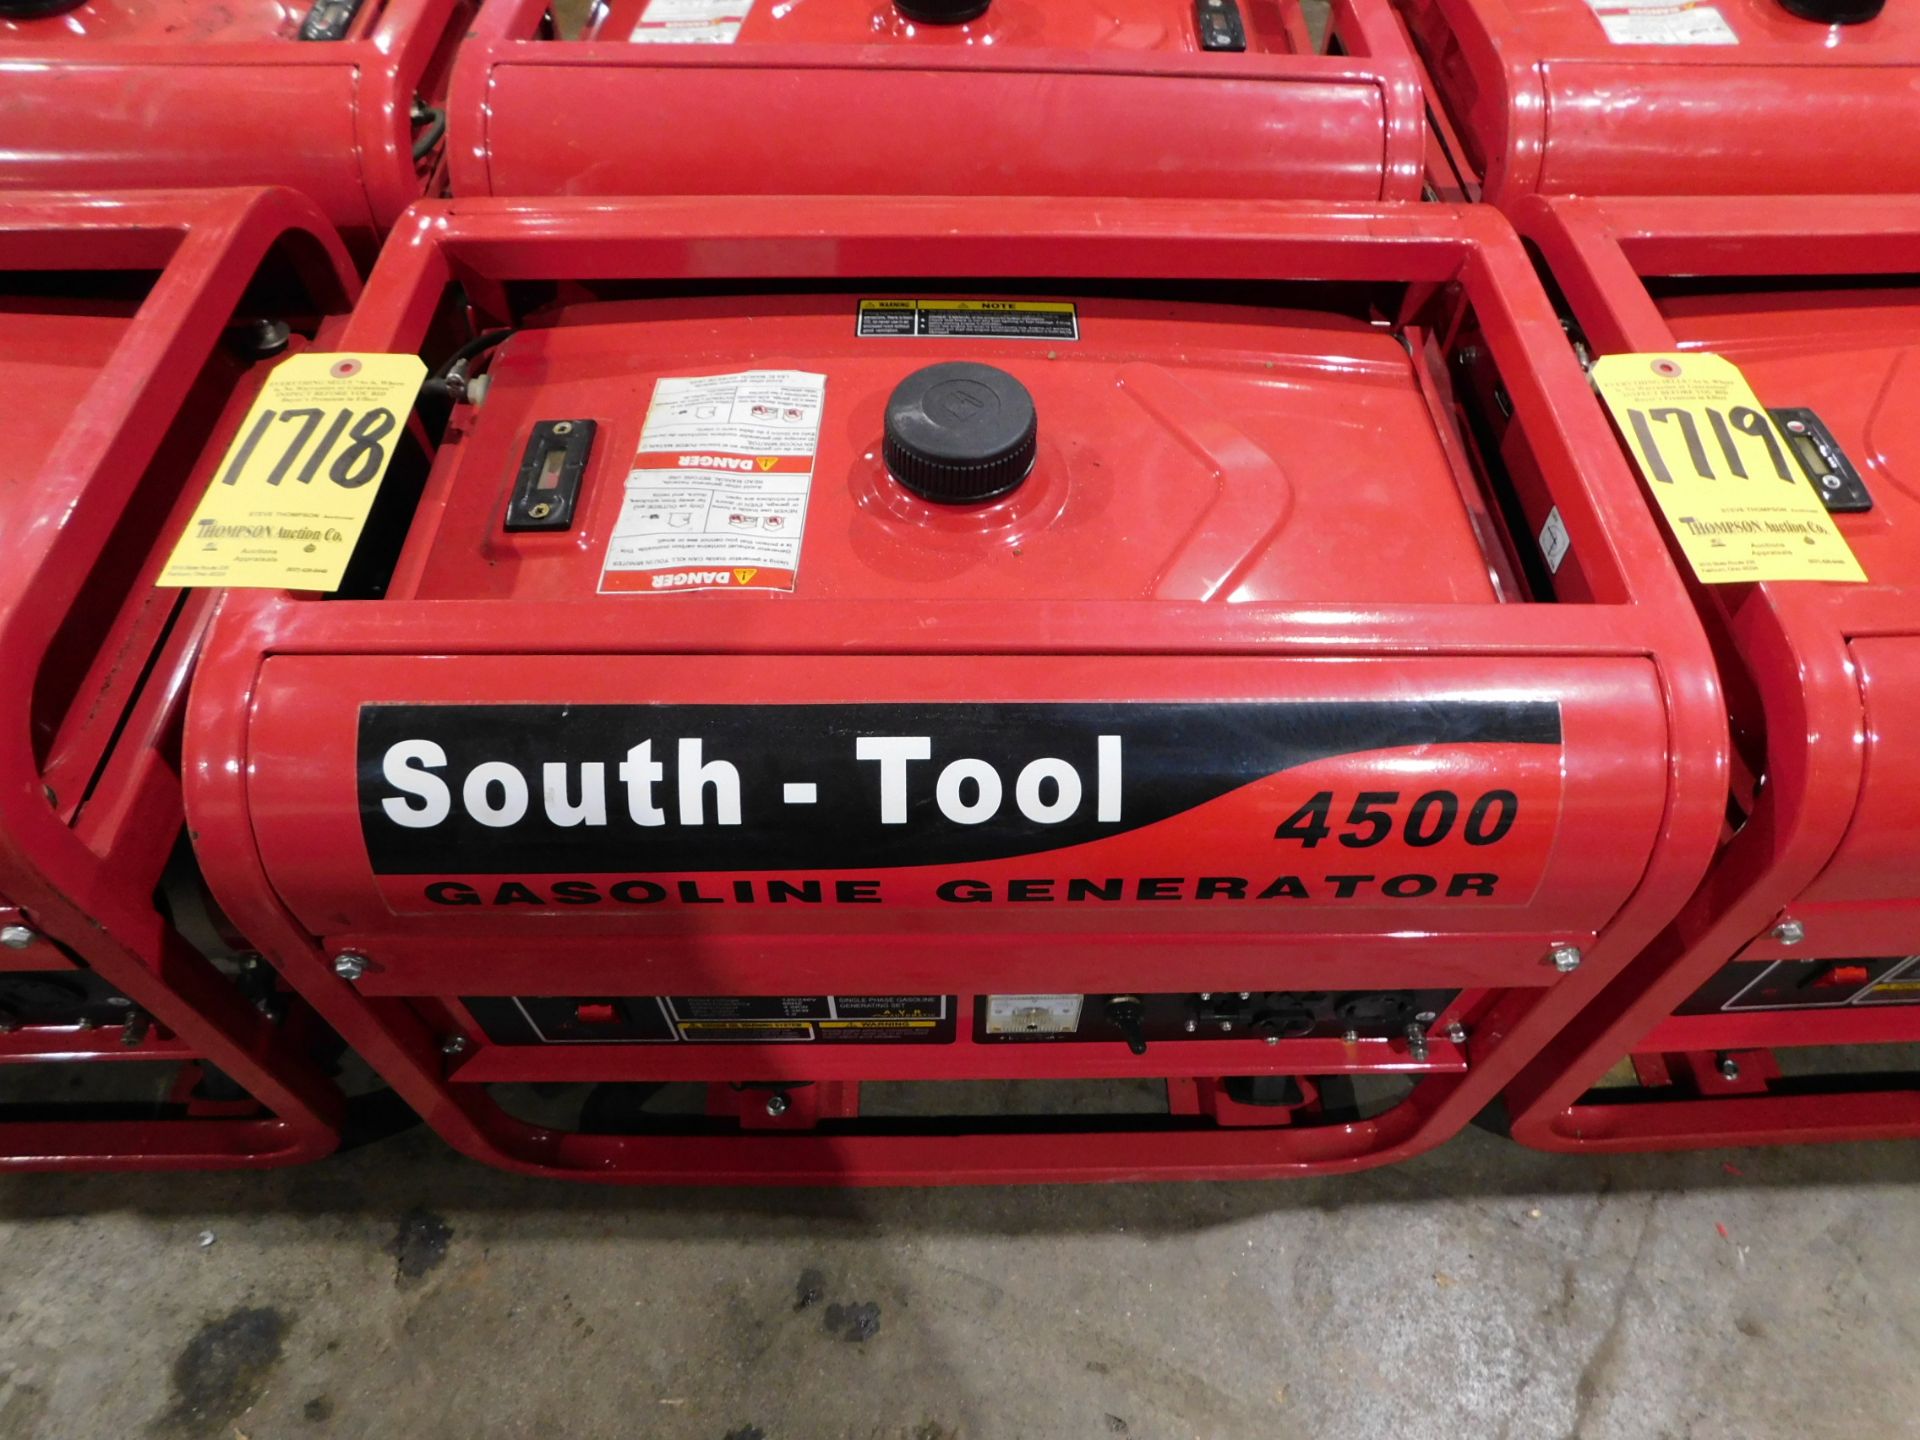 South Tool Model 4500 Gas Powered Generator 4500 Max Watts Condition Unknown